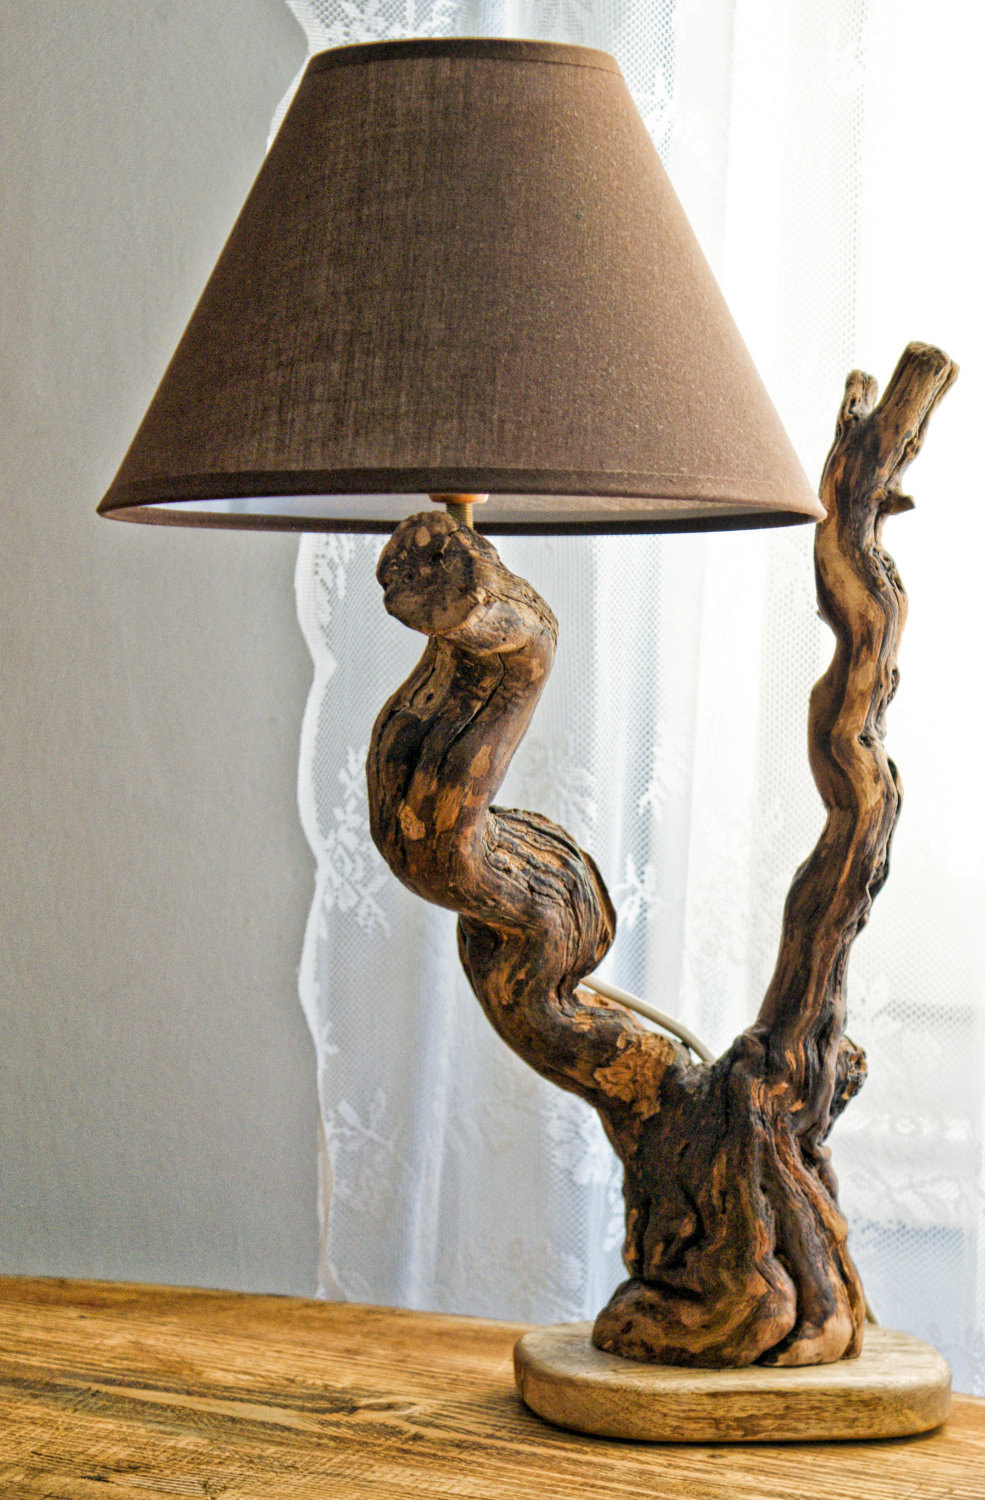 Driftwood Lamp with a Cream Shade